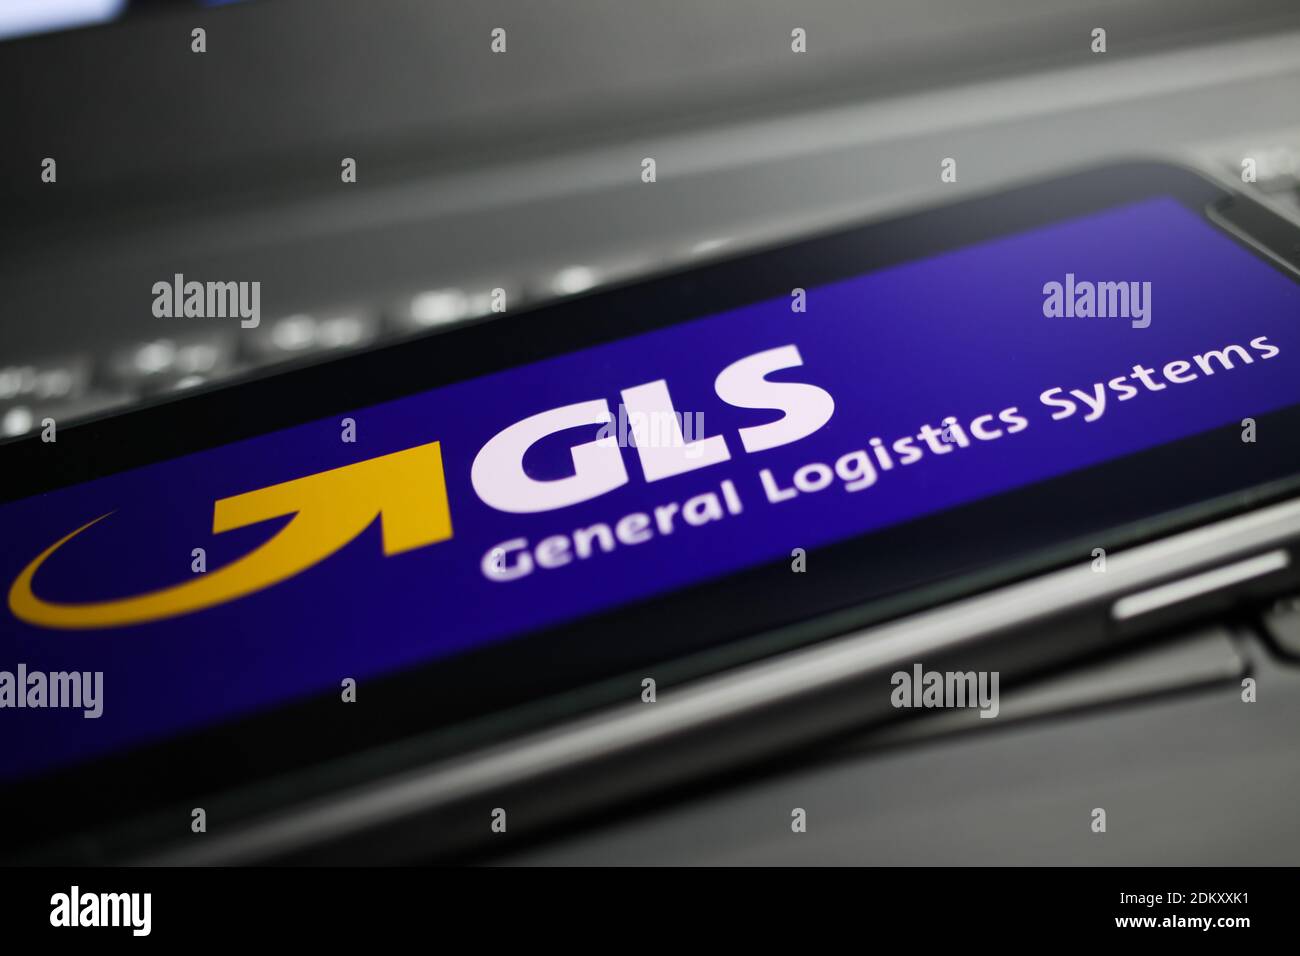 Gls Germany Logistics High Resolution Stock Photography and Images - Alamy